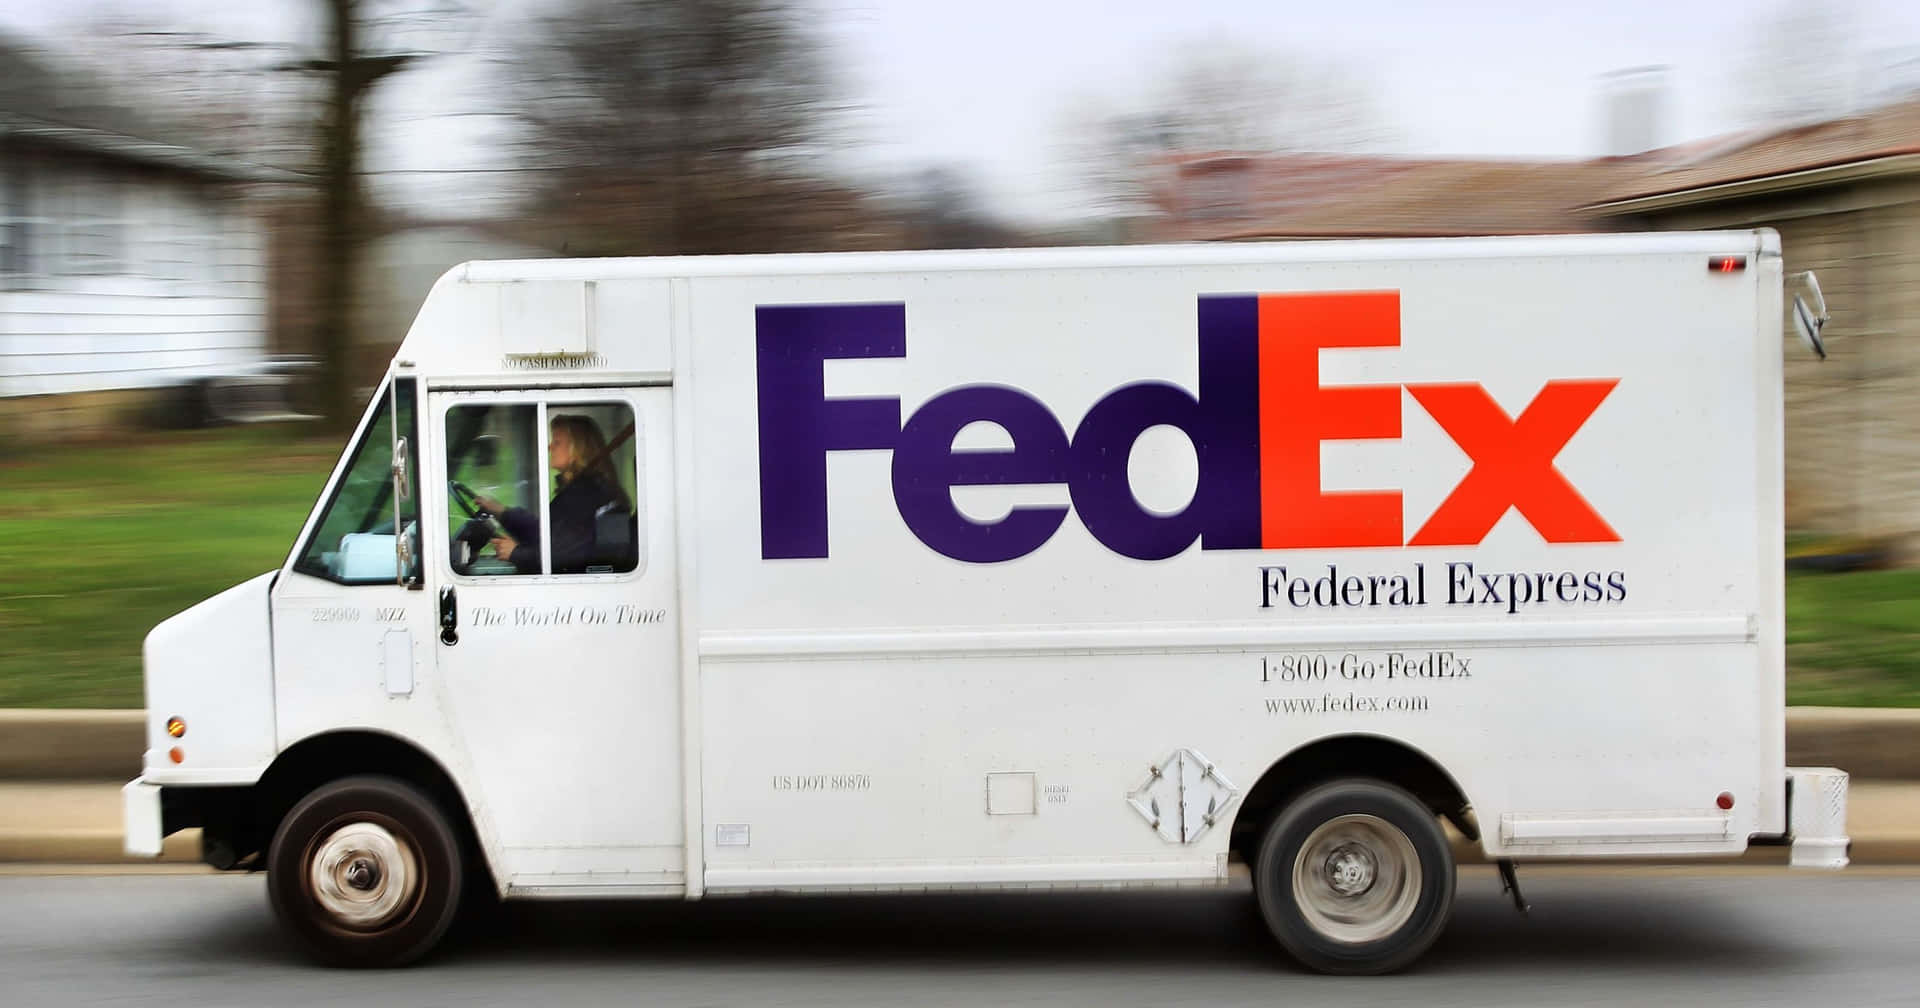 The speed and convenience of FedEx